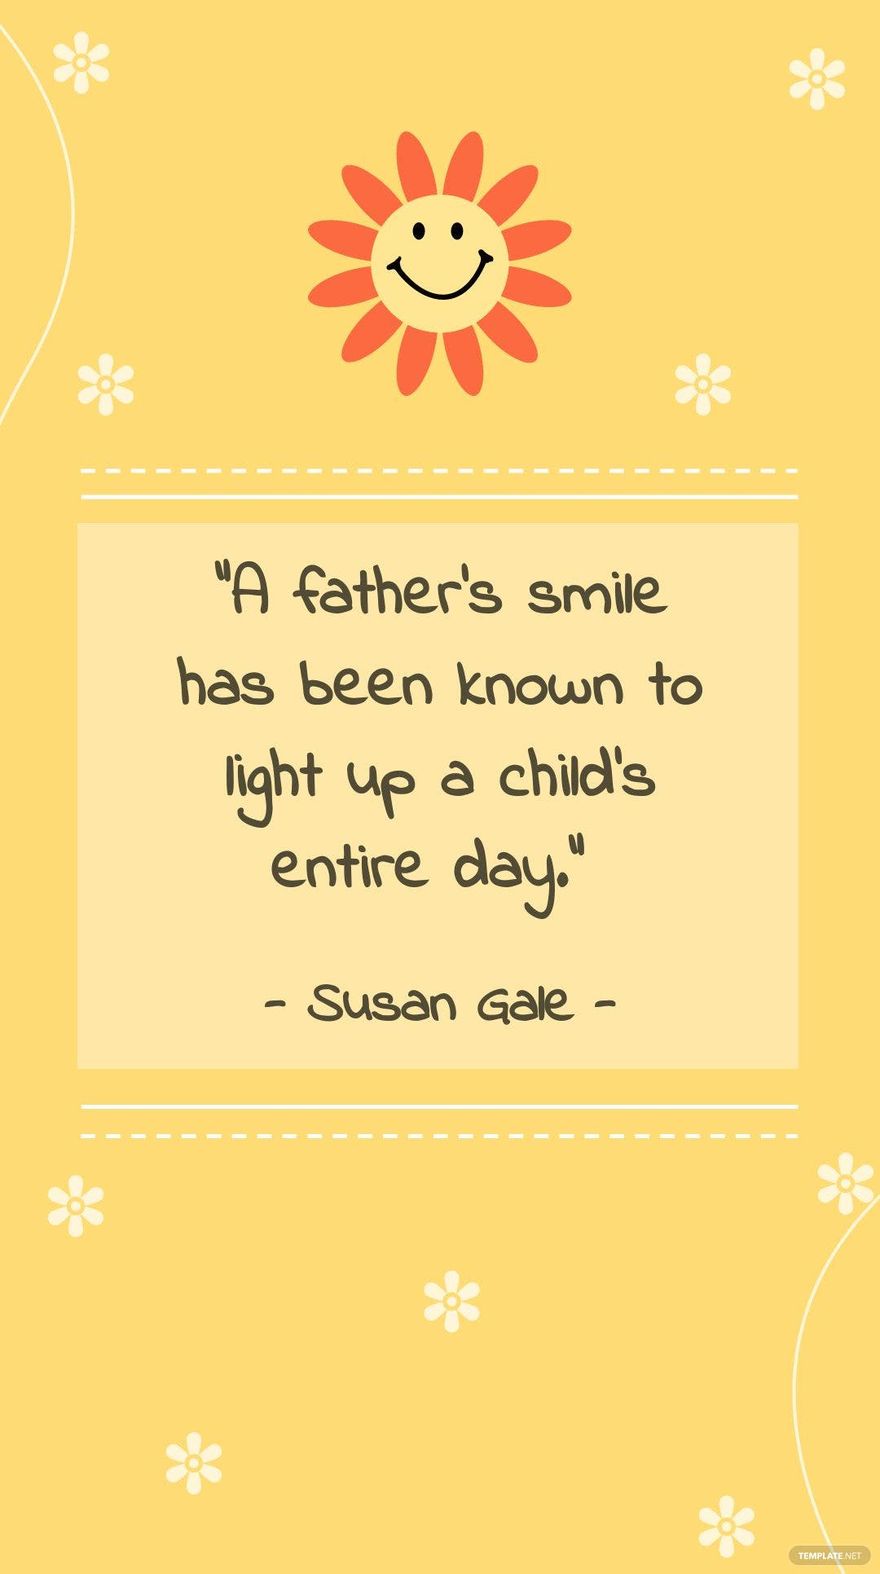 Susan Gale - “A father’s smile has been known to light up a child’s entire day.” 